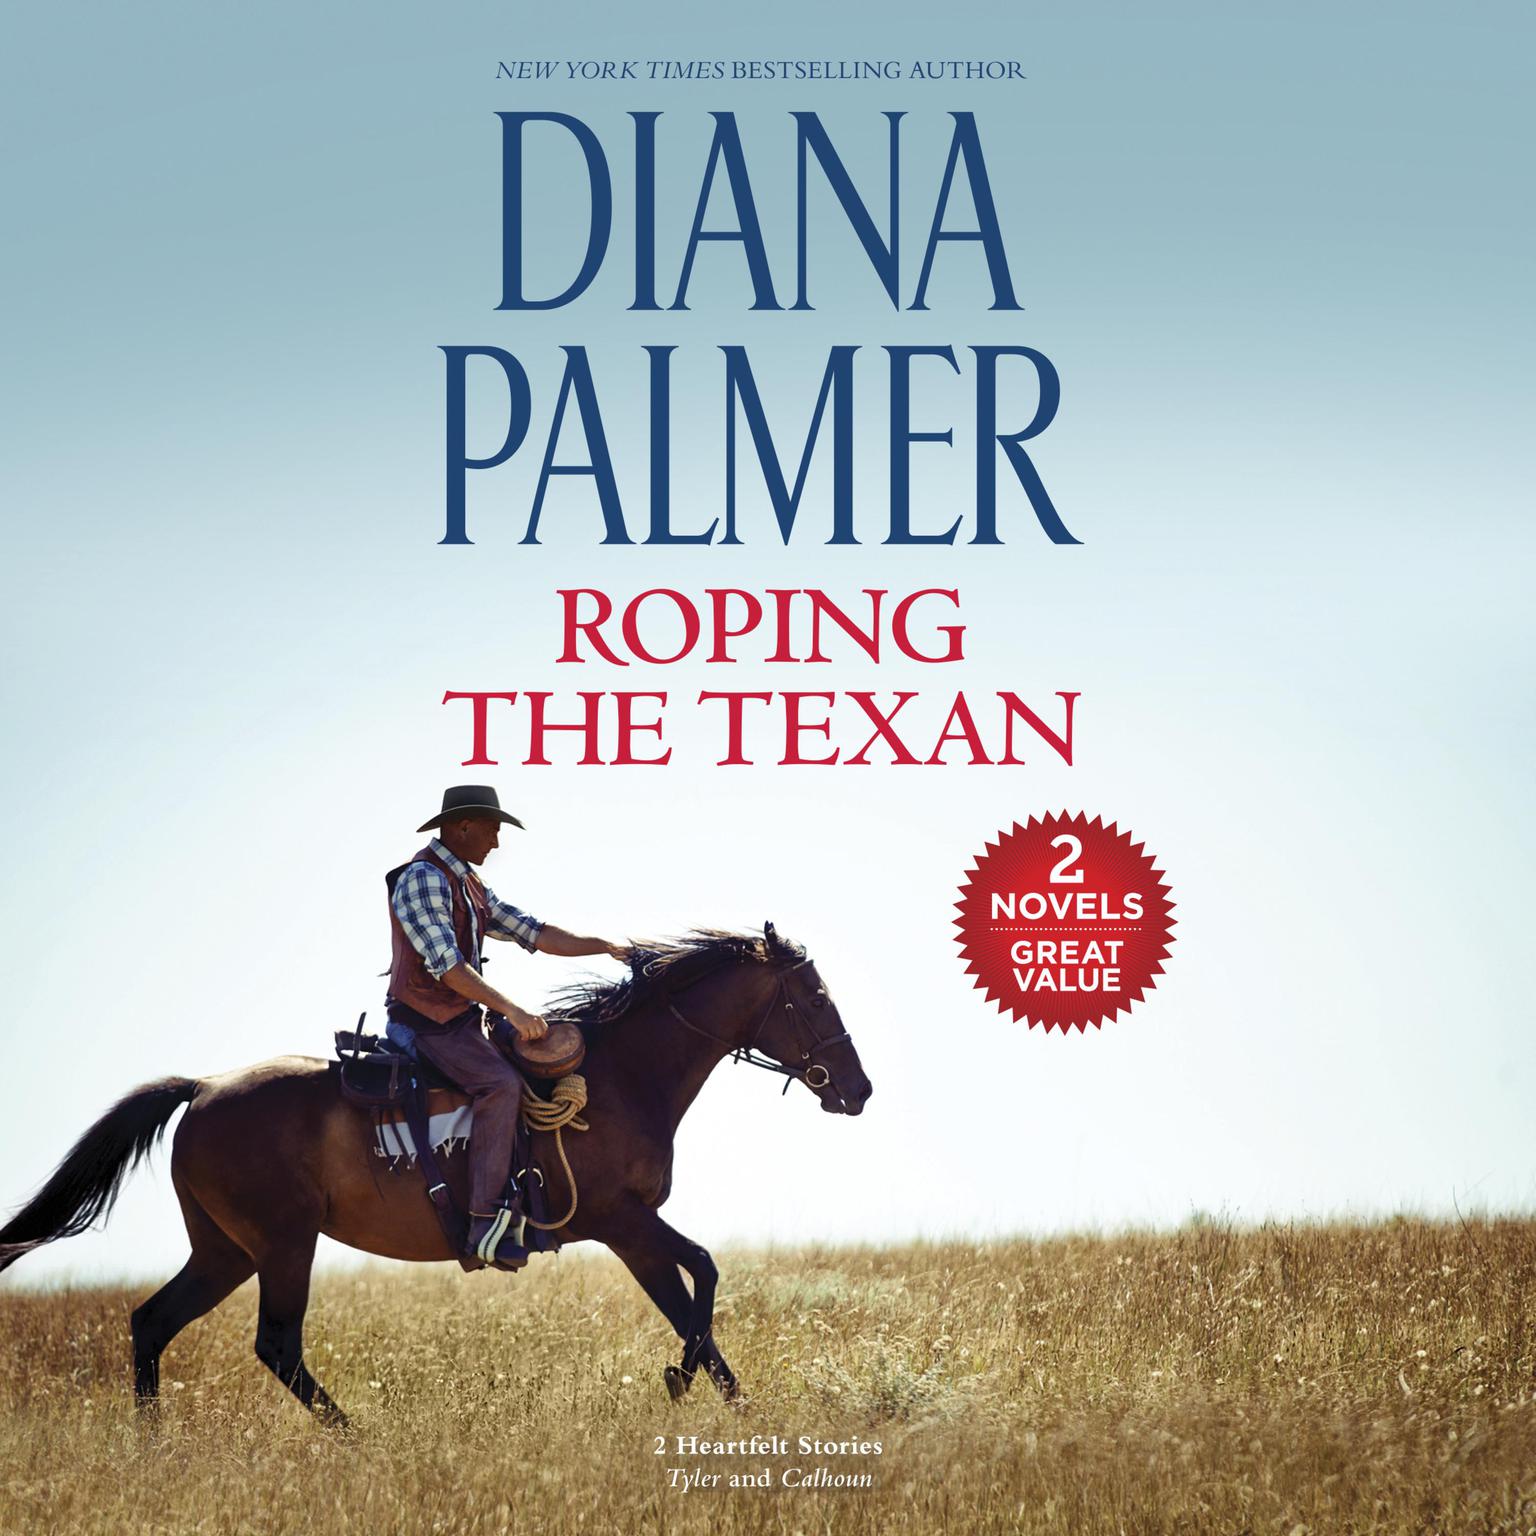 Roping the Texan Audiobook, by Diana Palmer